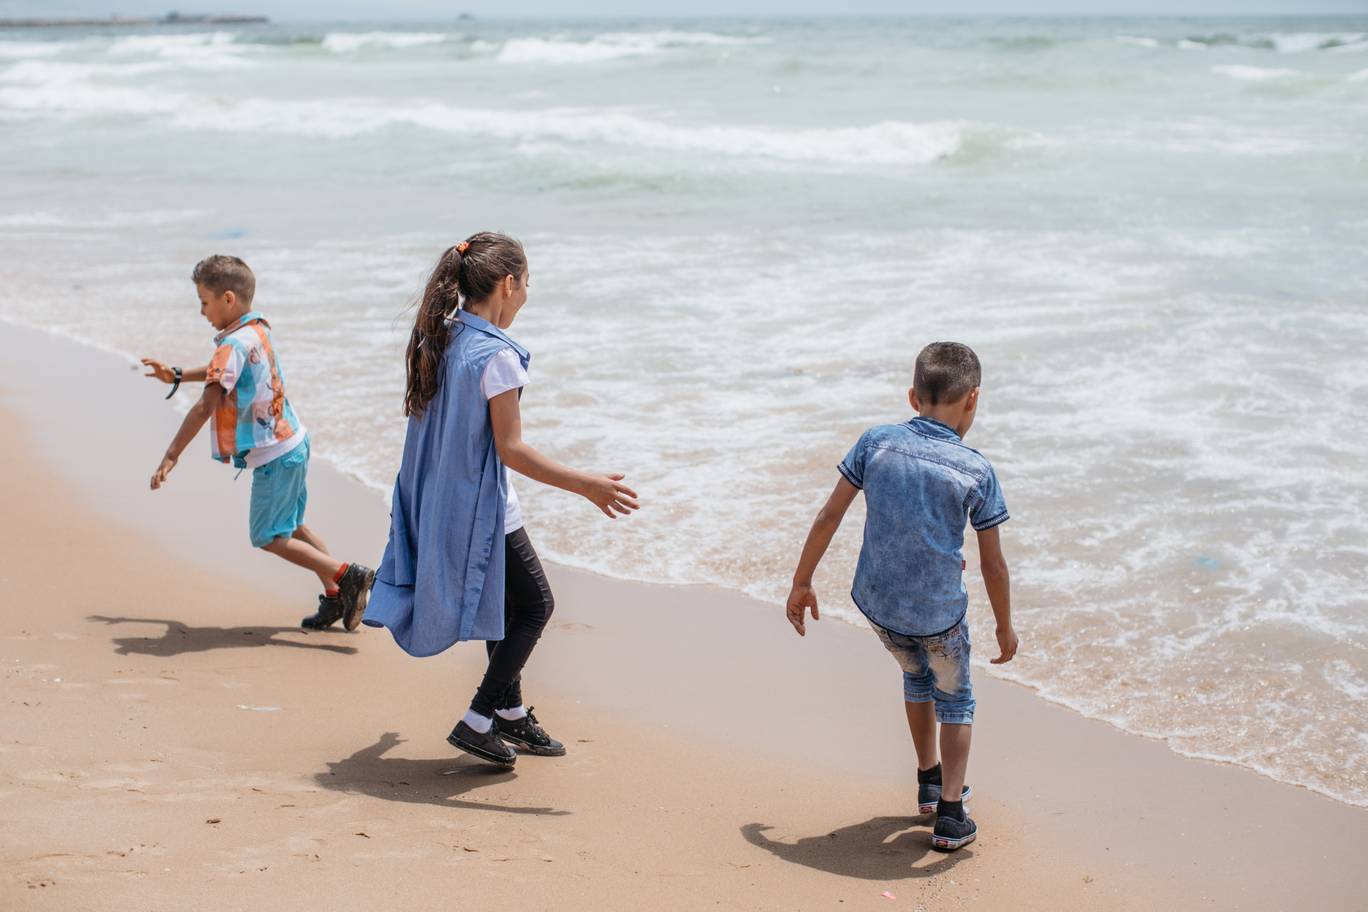 Sara, Ali and Deeb chase the white water on Lebanon’s coastline. As the waves break on the sand, so too do the barriers between siblings. They laugh together and have forgotten about their struggle for now - Photo by Paddy Dowling